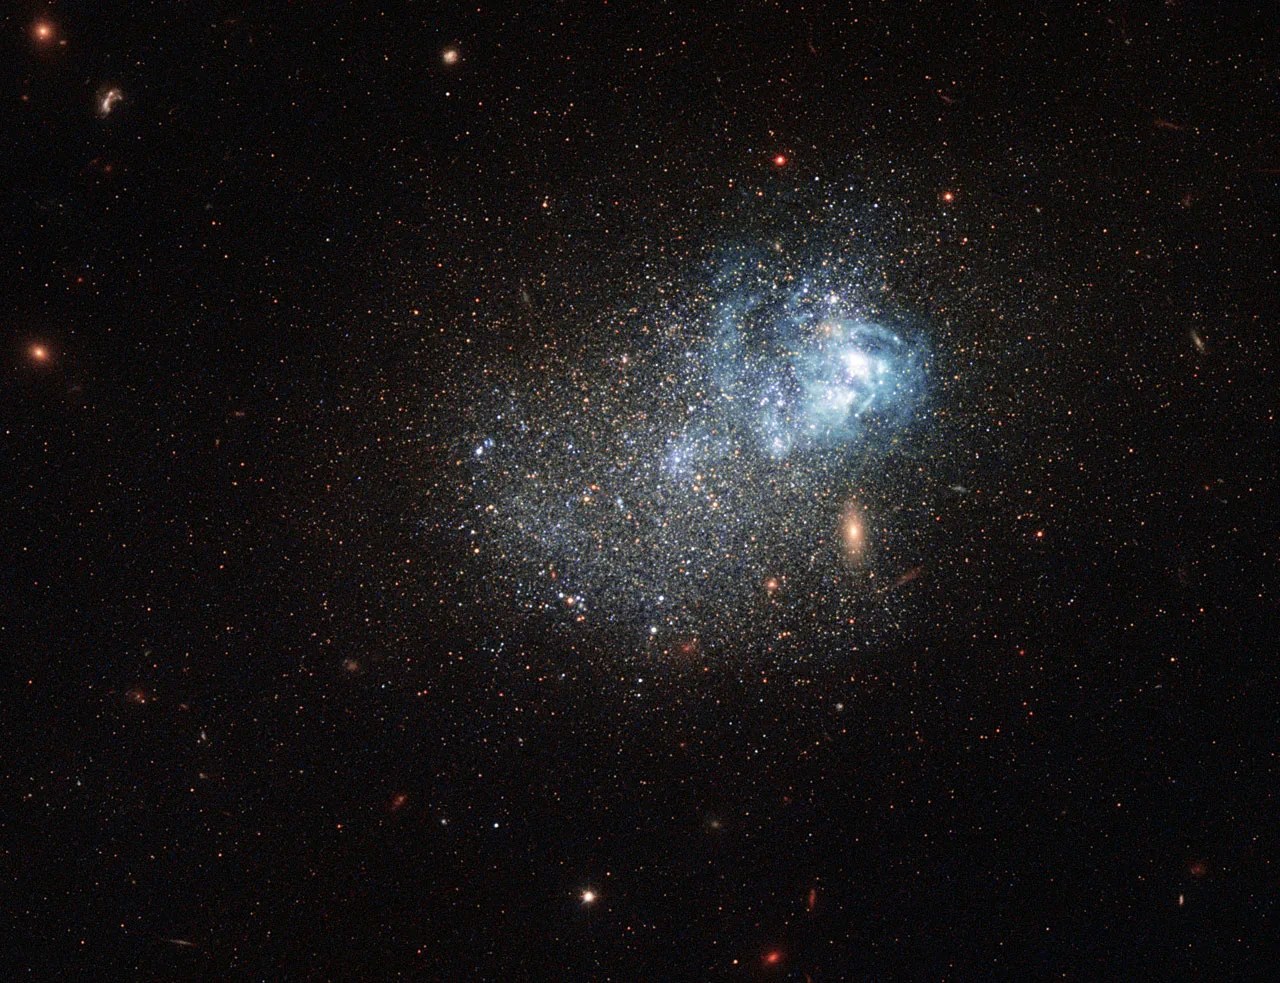 An irregular but somewhat spherical collection of stars, with a large bluish knot of gas visible to the left side of the grouping. Other farther galaxies are visible in the background.